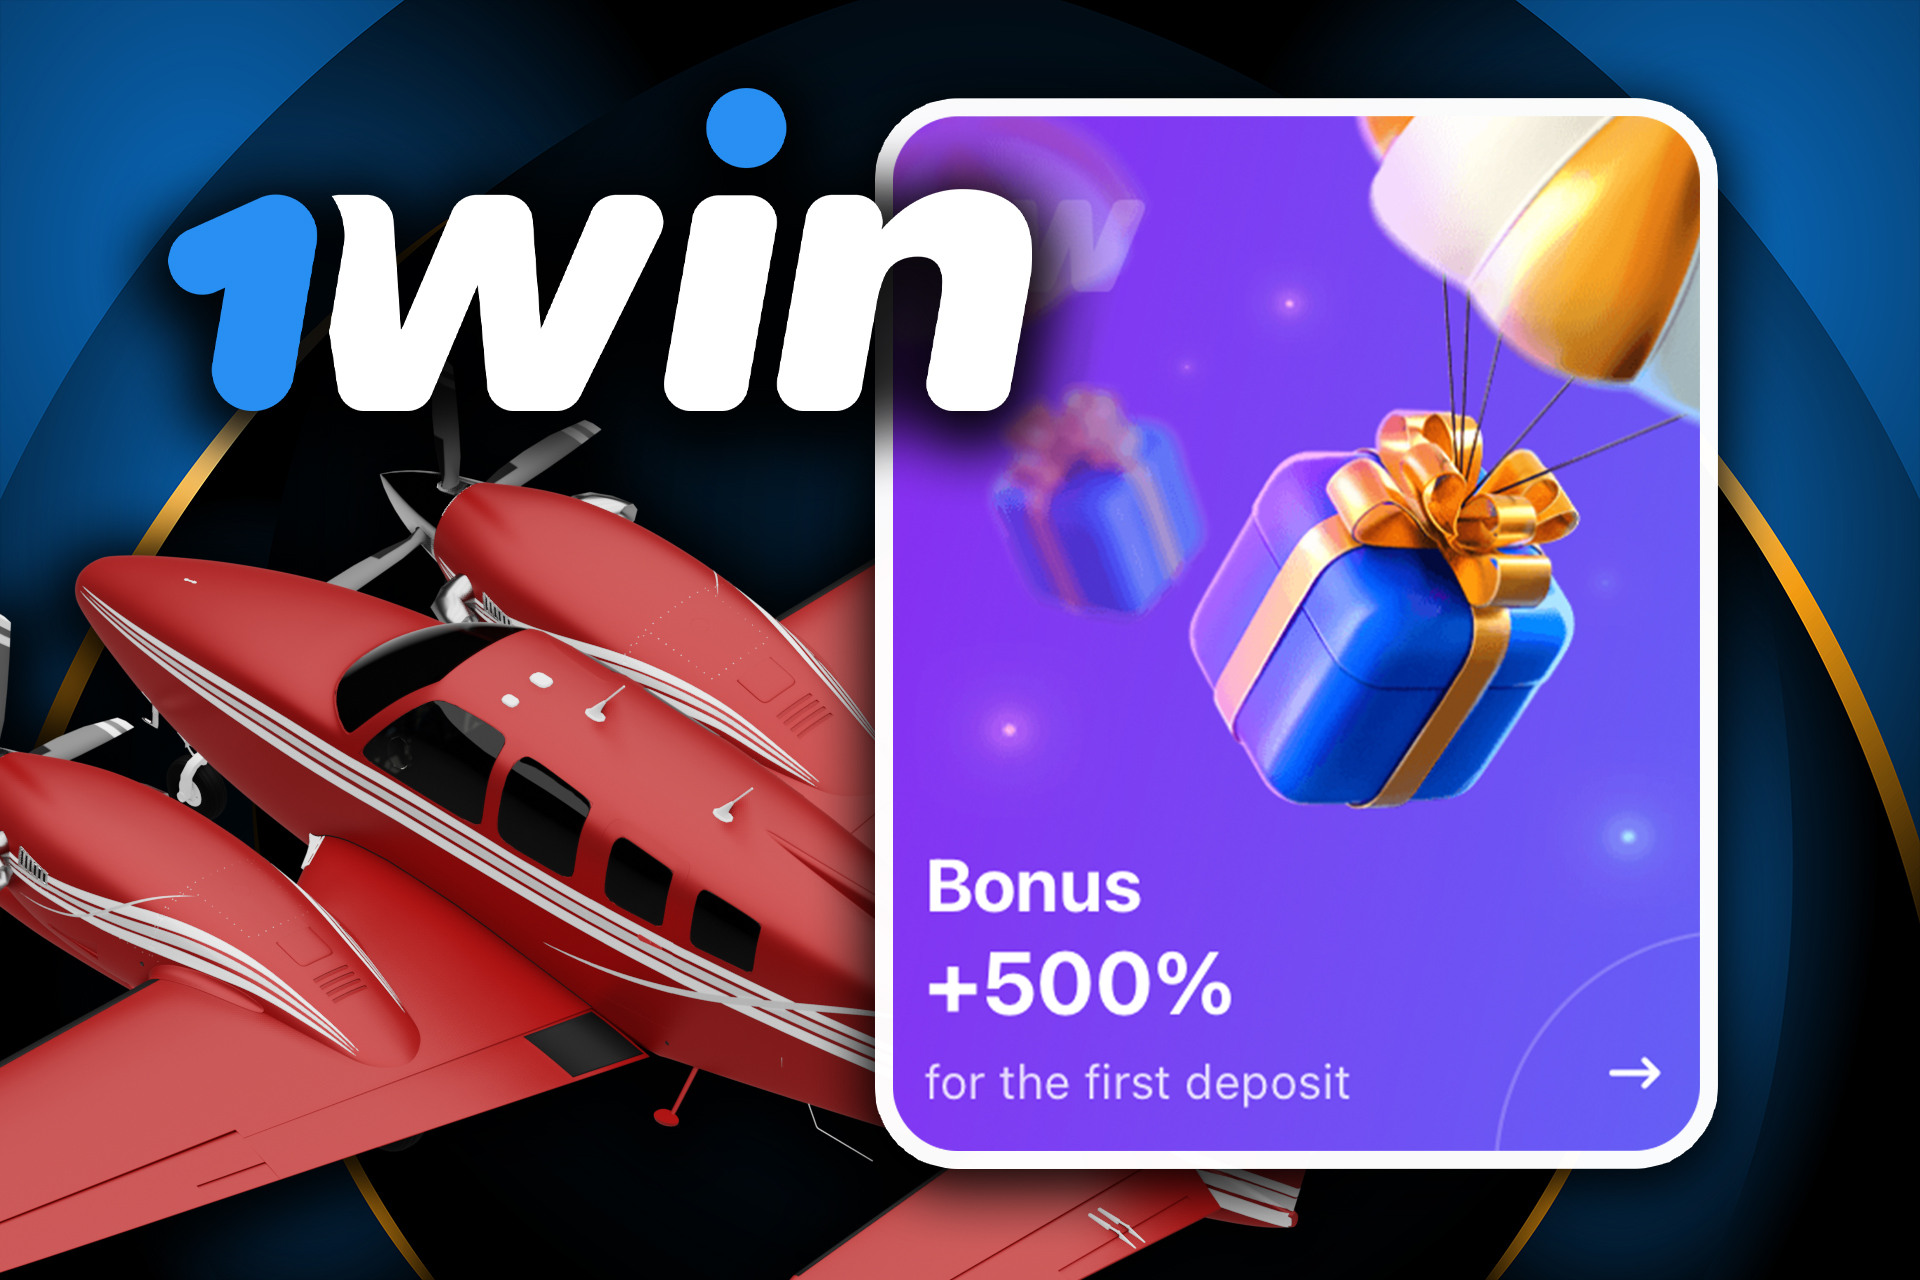 1win gives you up to 500% bonus on your first deposit.